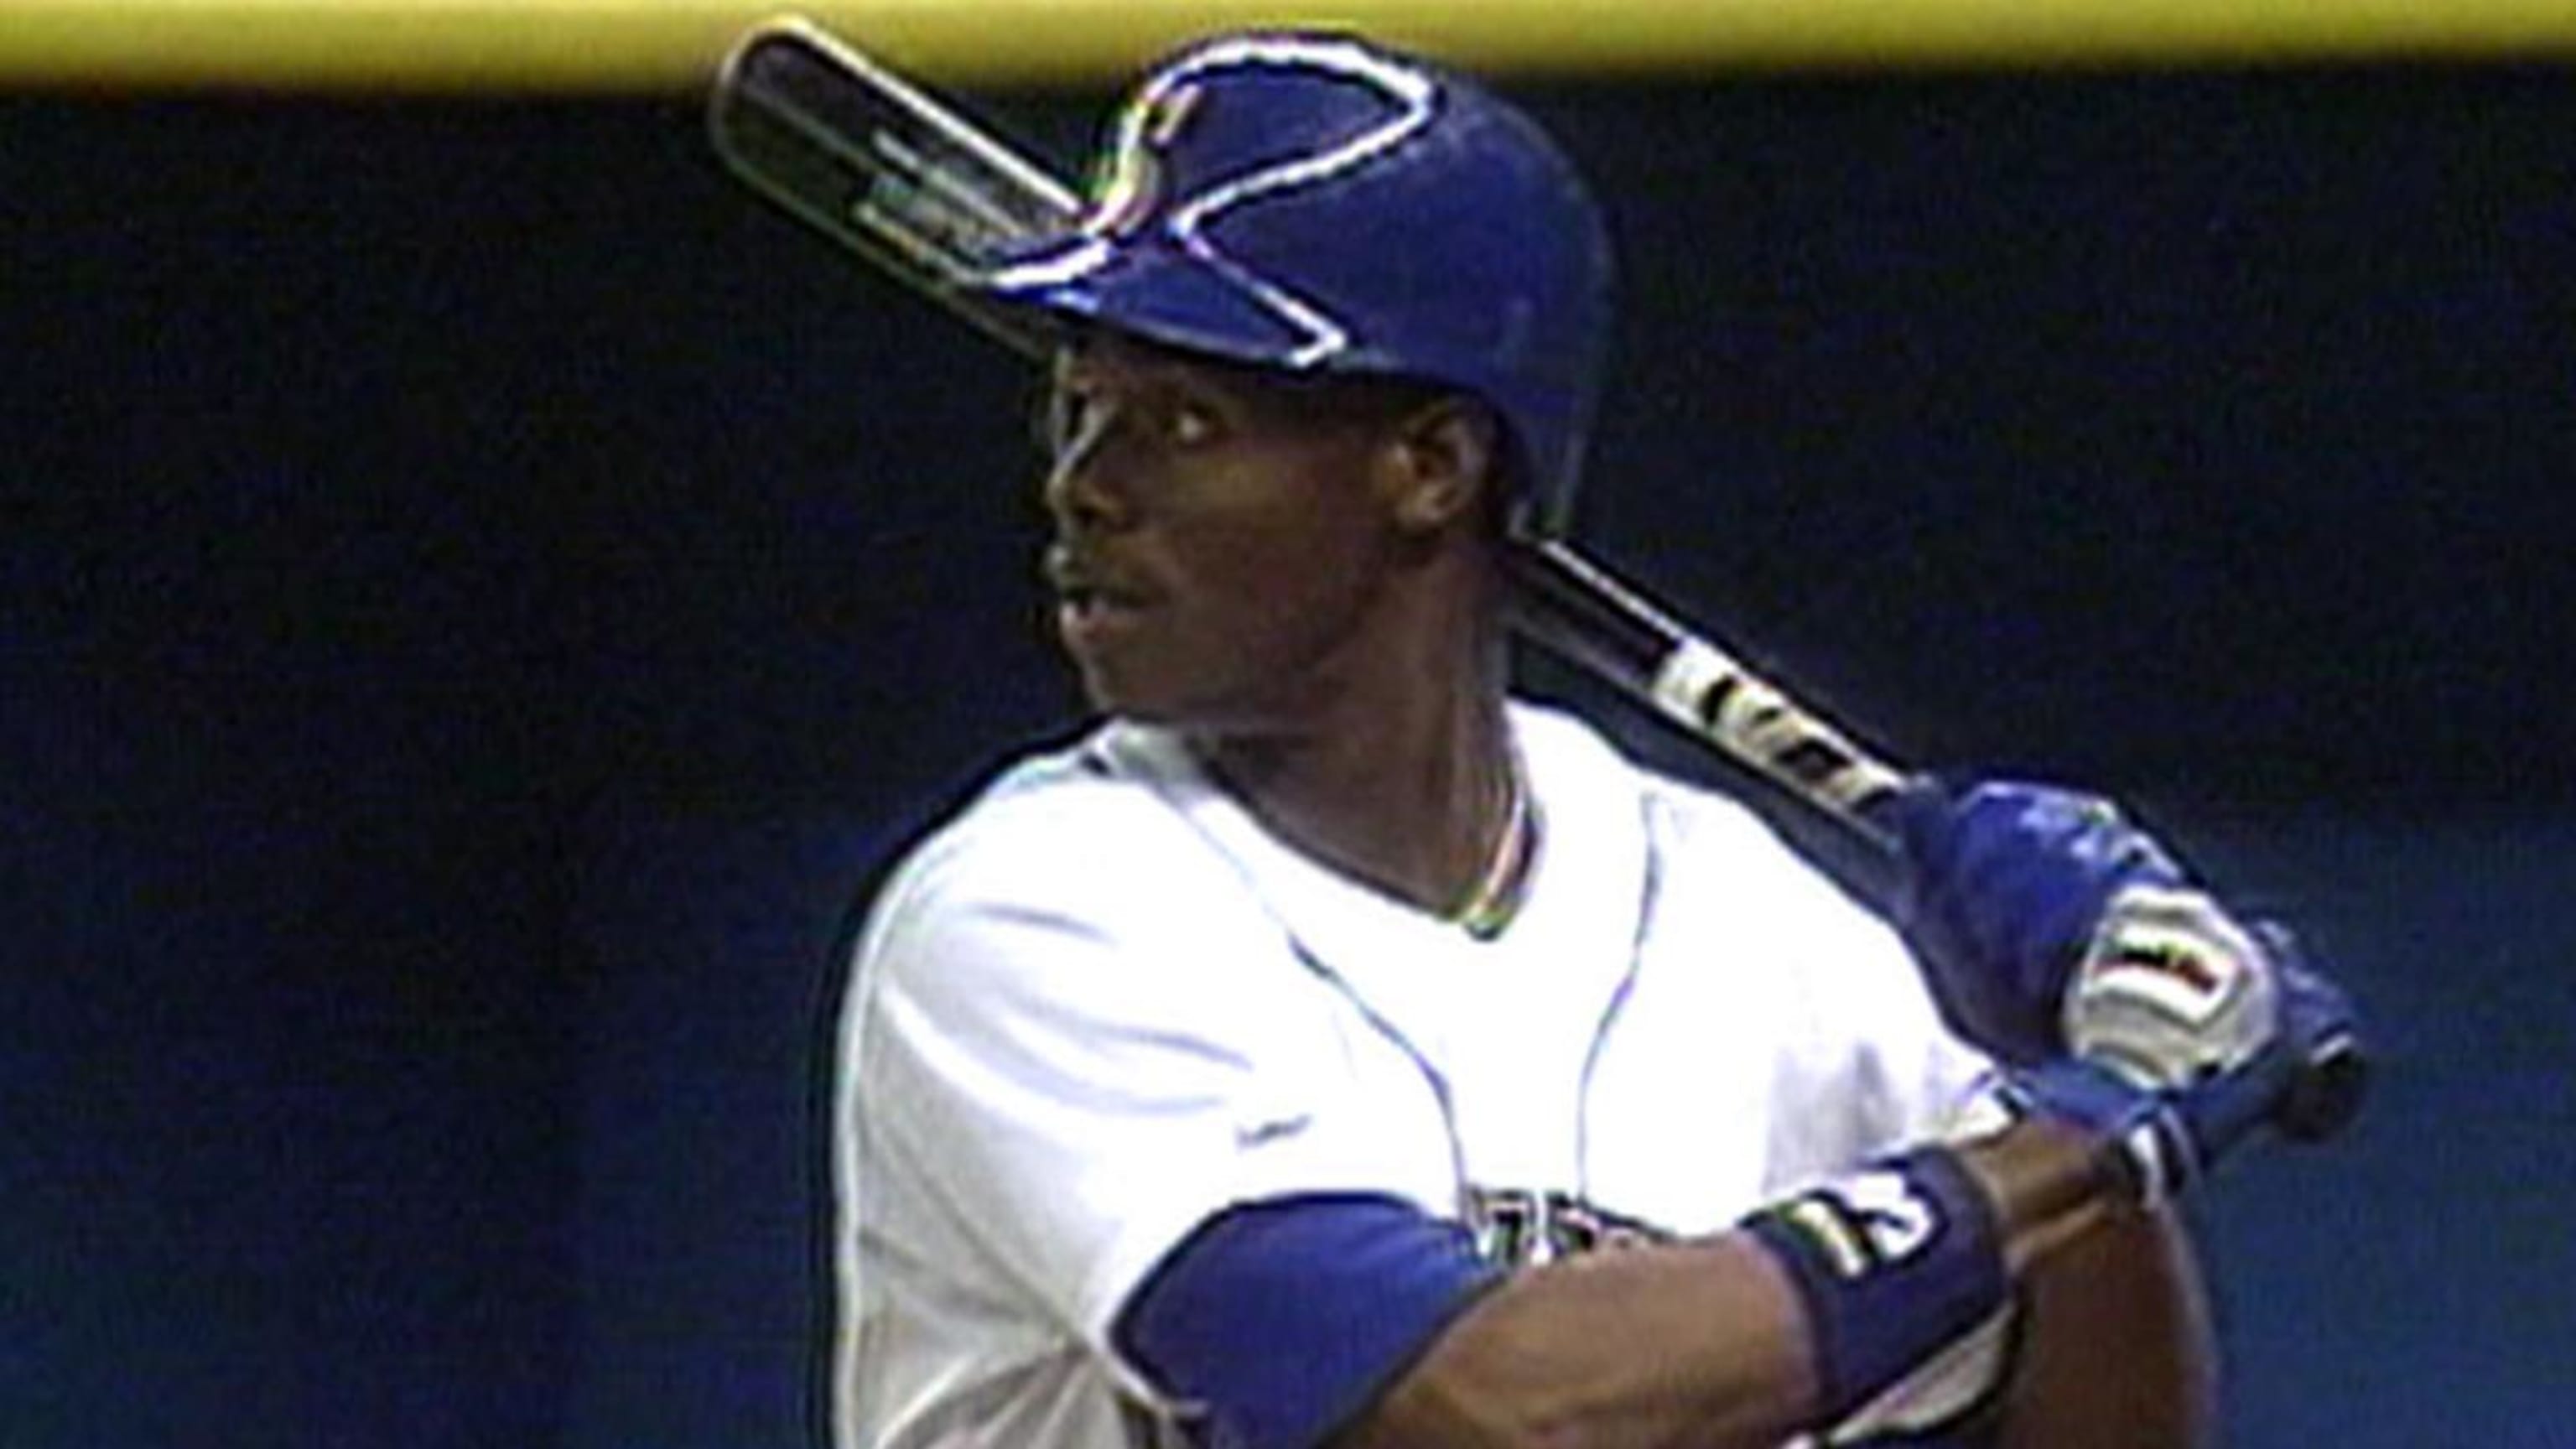 Seattle Mariners' Ken Griffey Jr. during a baseball game against